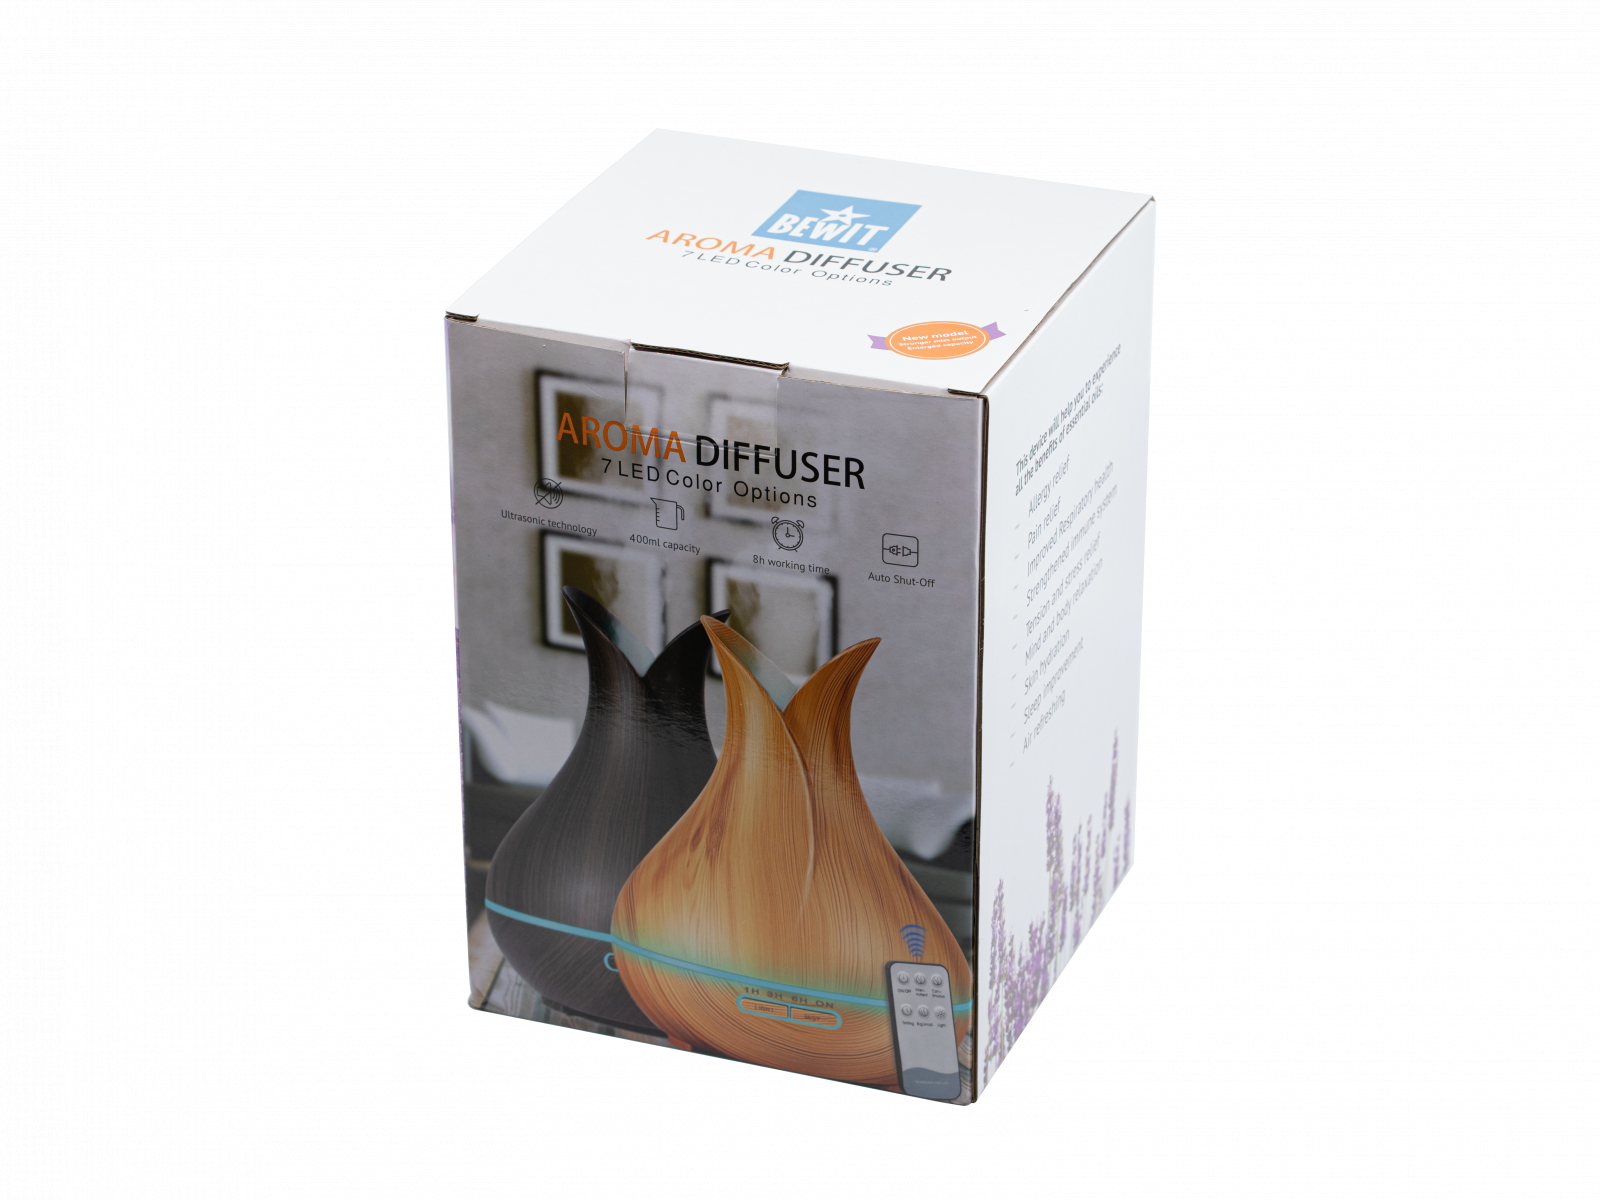 Aroma diffuser CARAFE 400 RC, light wood, with remote control - Ultrasonic diffuser - 4